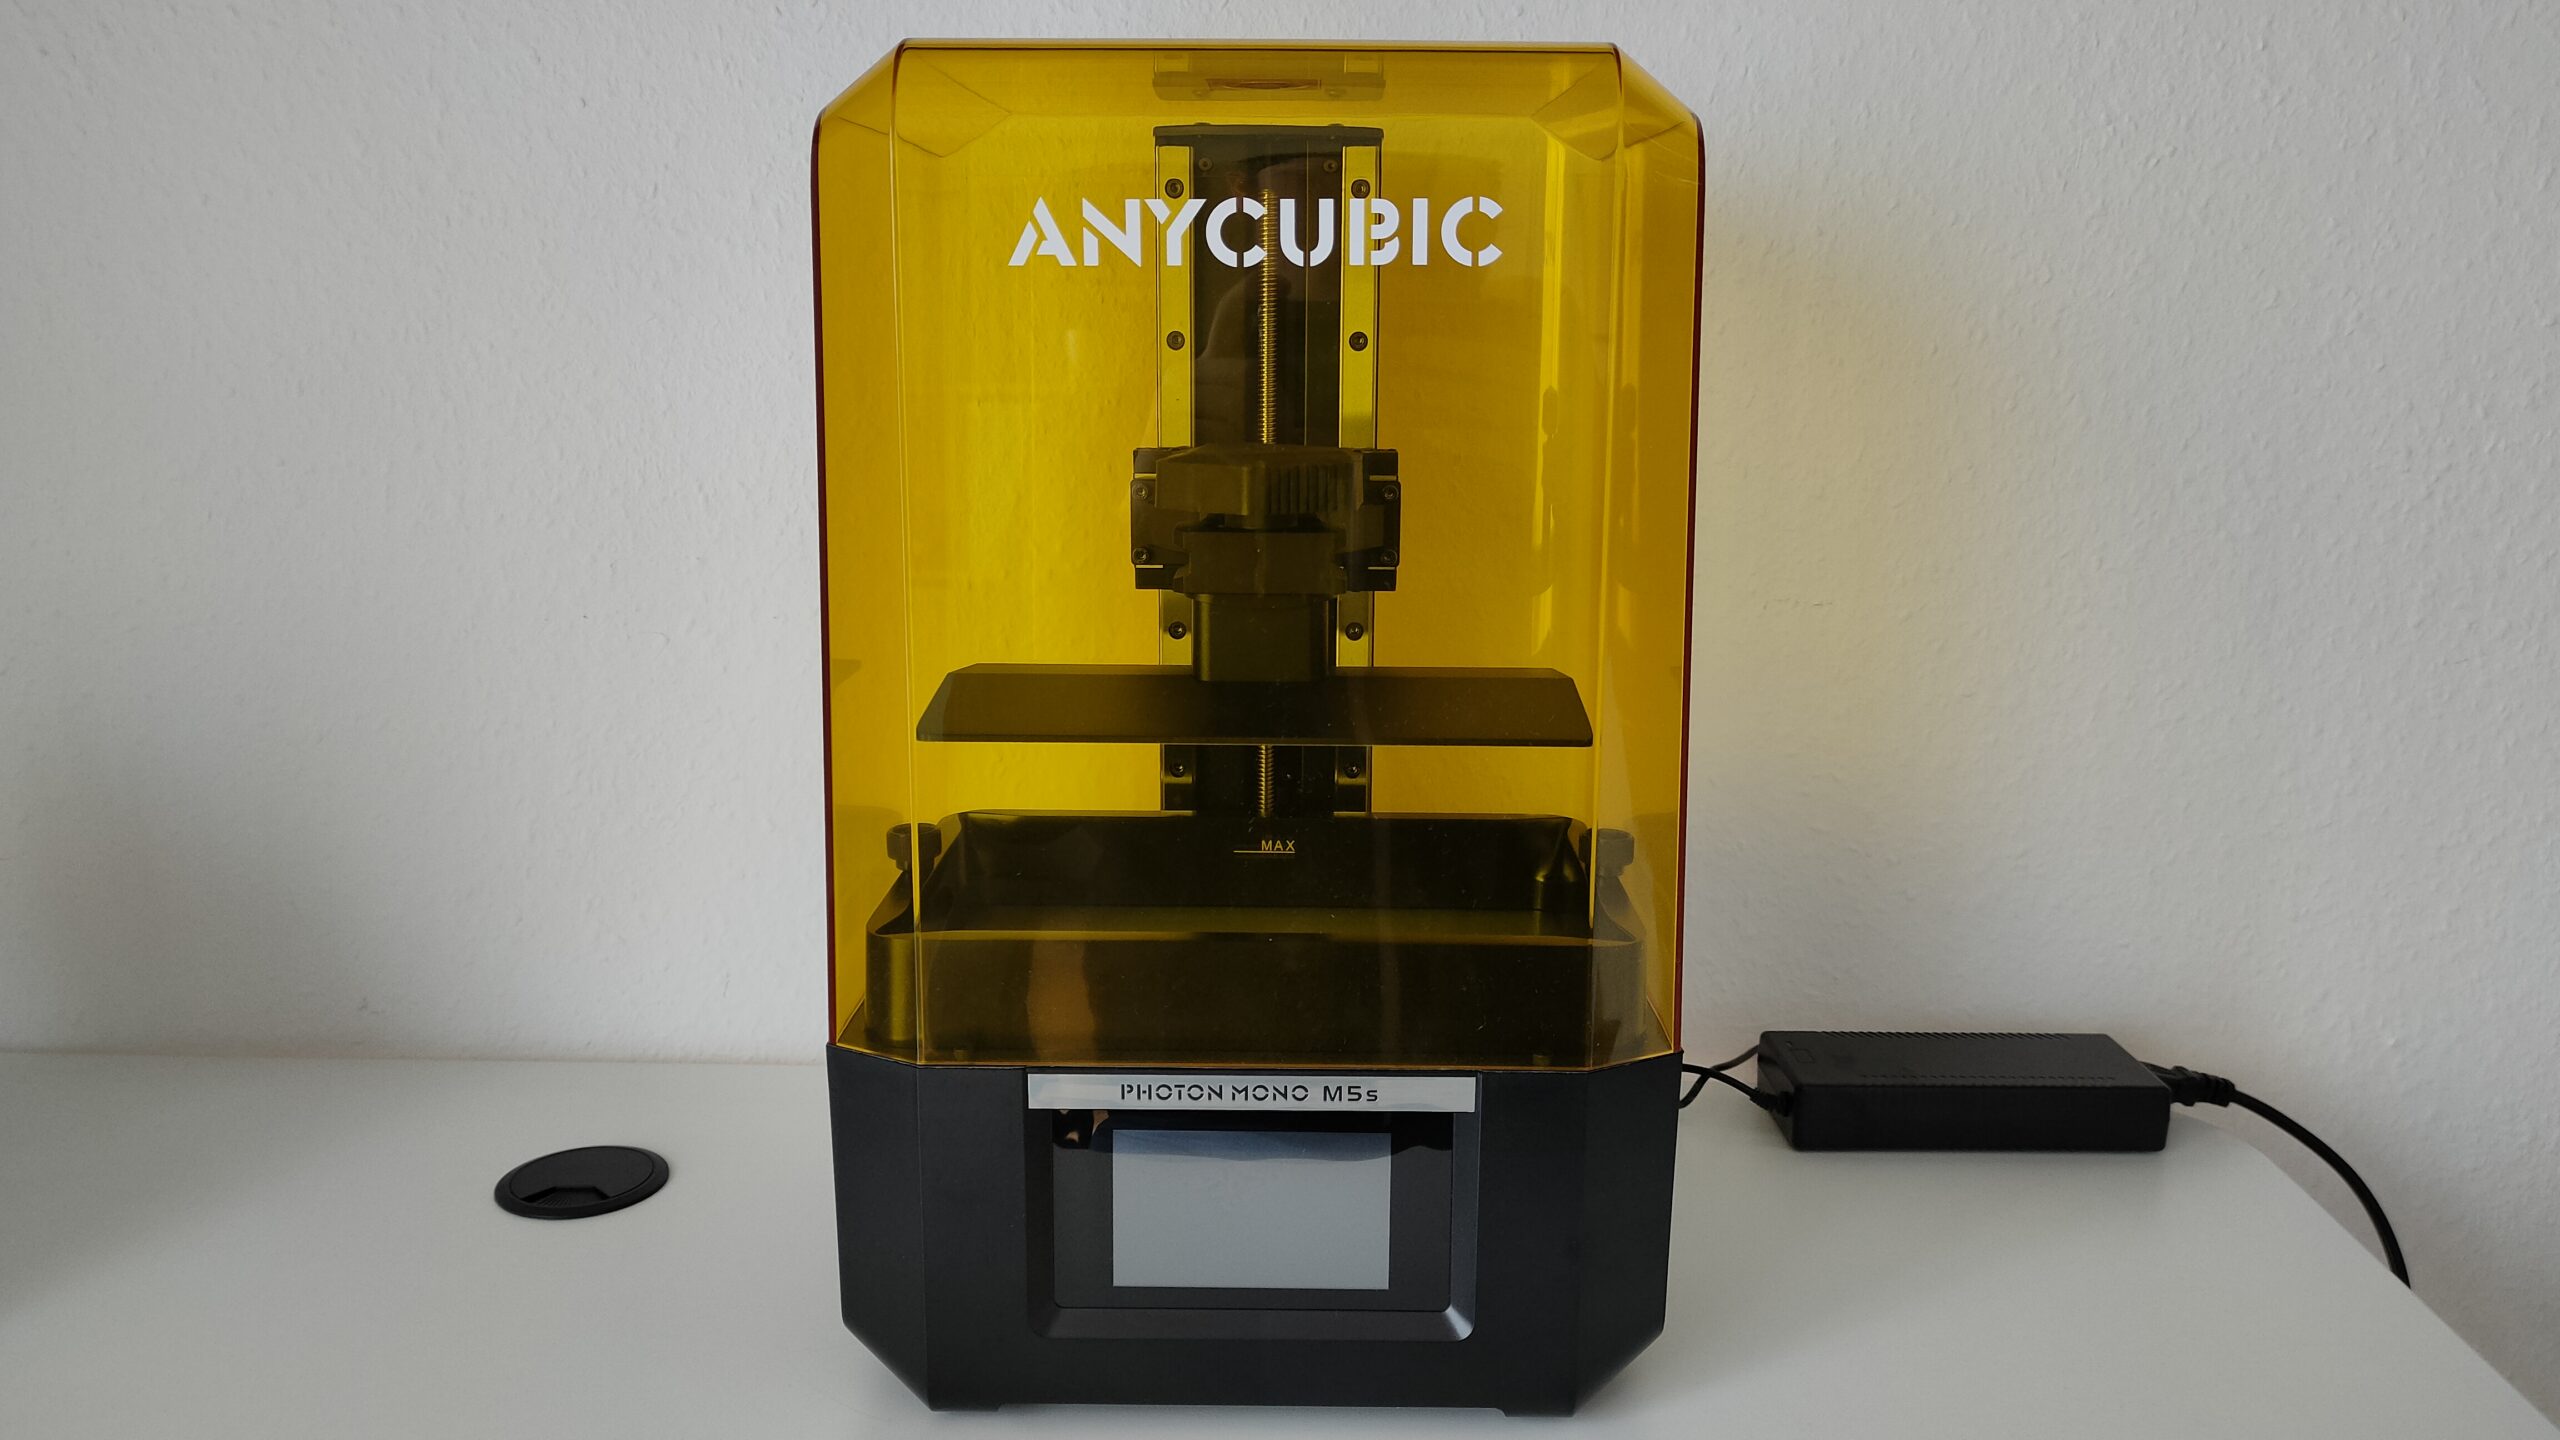 Anycubic Photon Mono M5, M5s & M5s Pro Official Group